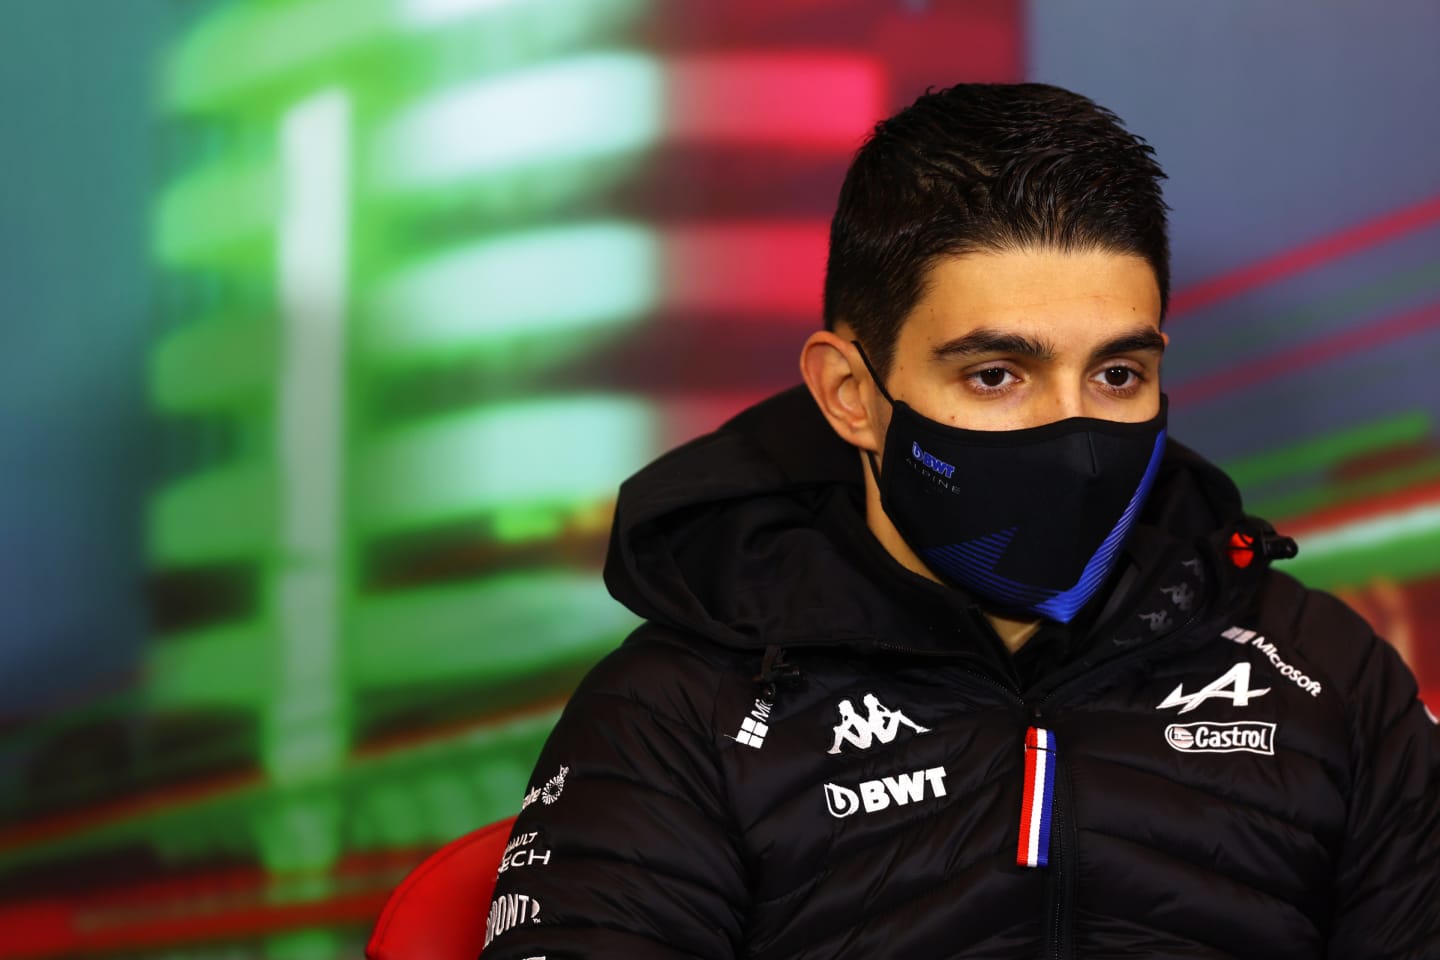 IMOLA, ITALY - APRIL 22: Esteban Ocon of France and Alpine F1 looks on in the Drivers Press Conference prior to practice ahead of the F1 Grand Prix of Emilia Romagna at Autodromo Enzo e Dino Ferrari on April 22, 2022 in Imola, Italy. (Photo by Lars Baron/Getty Images)